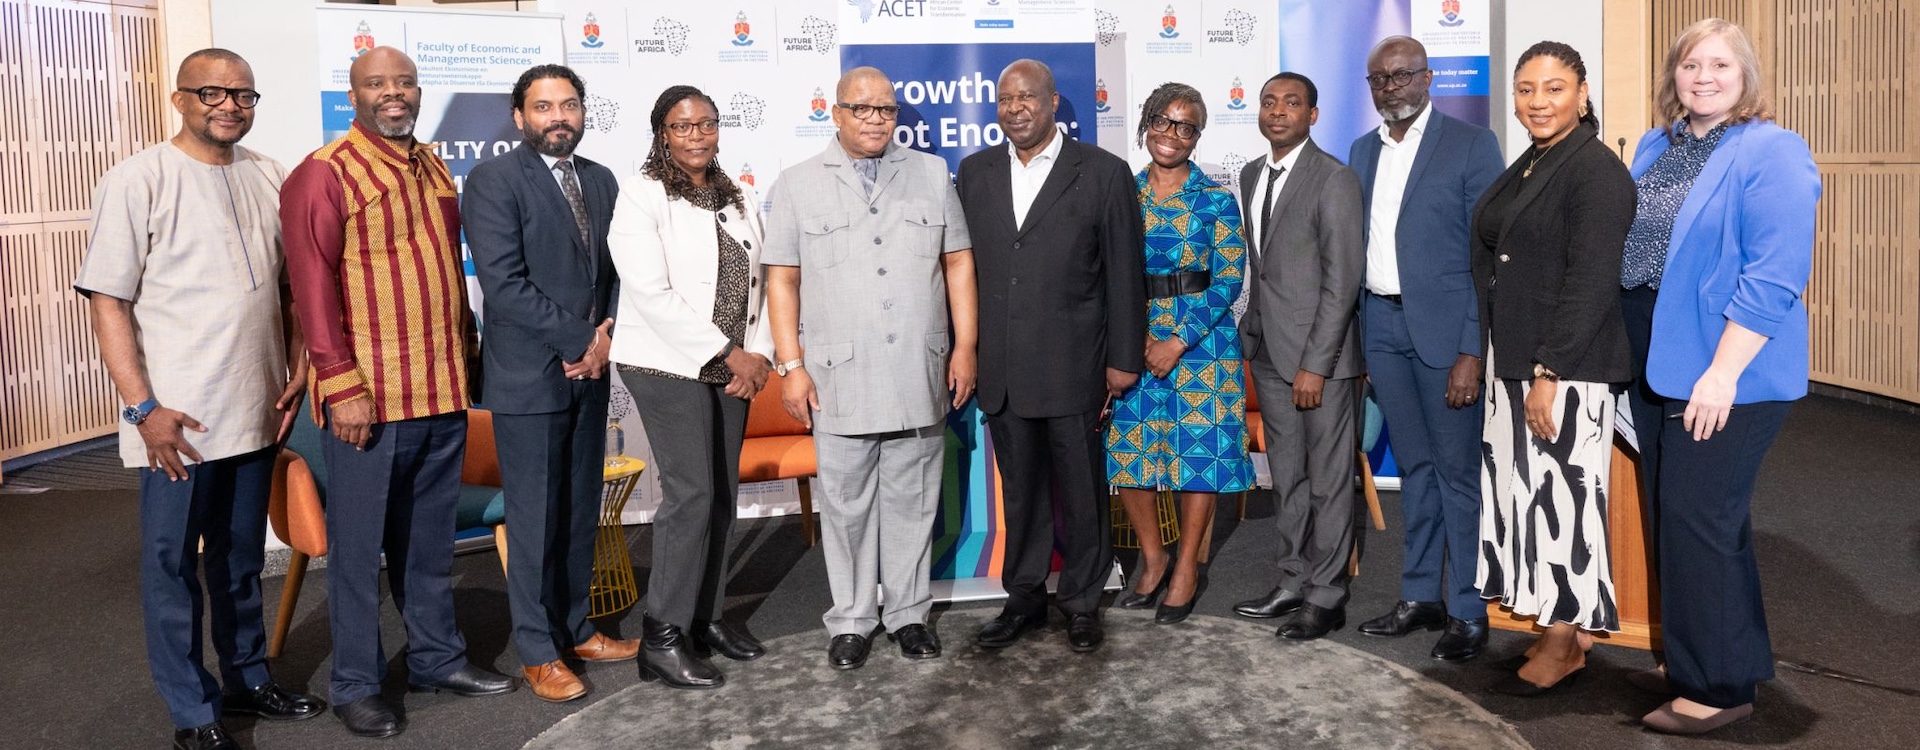 Growth is Not Enough: A Summit on Economic Transformation